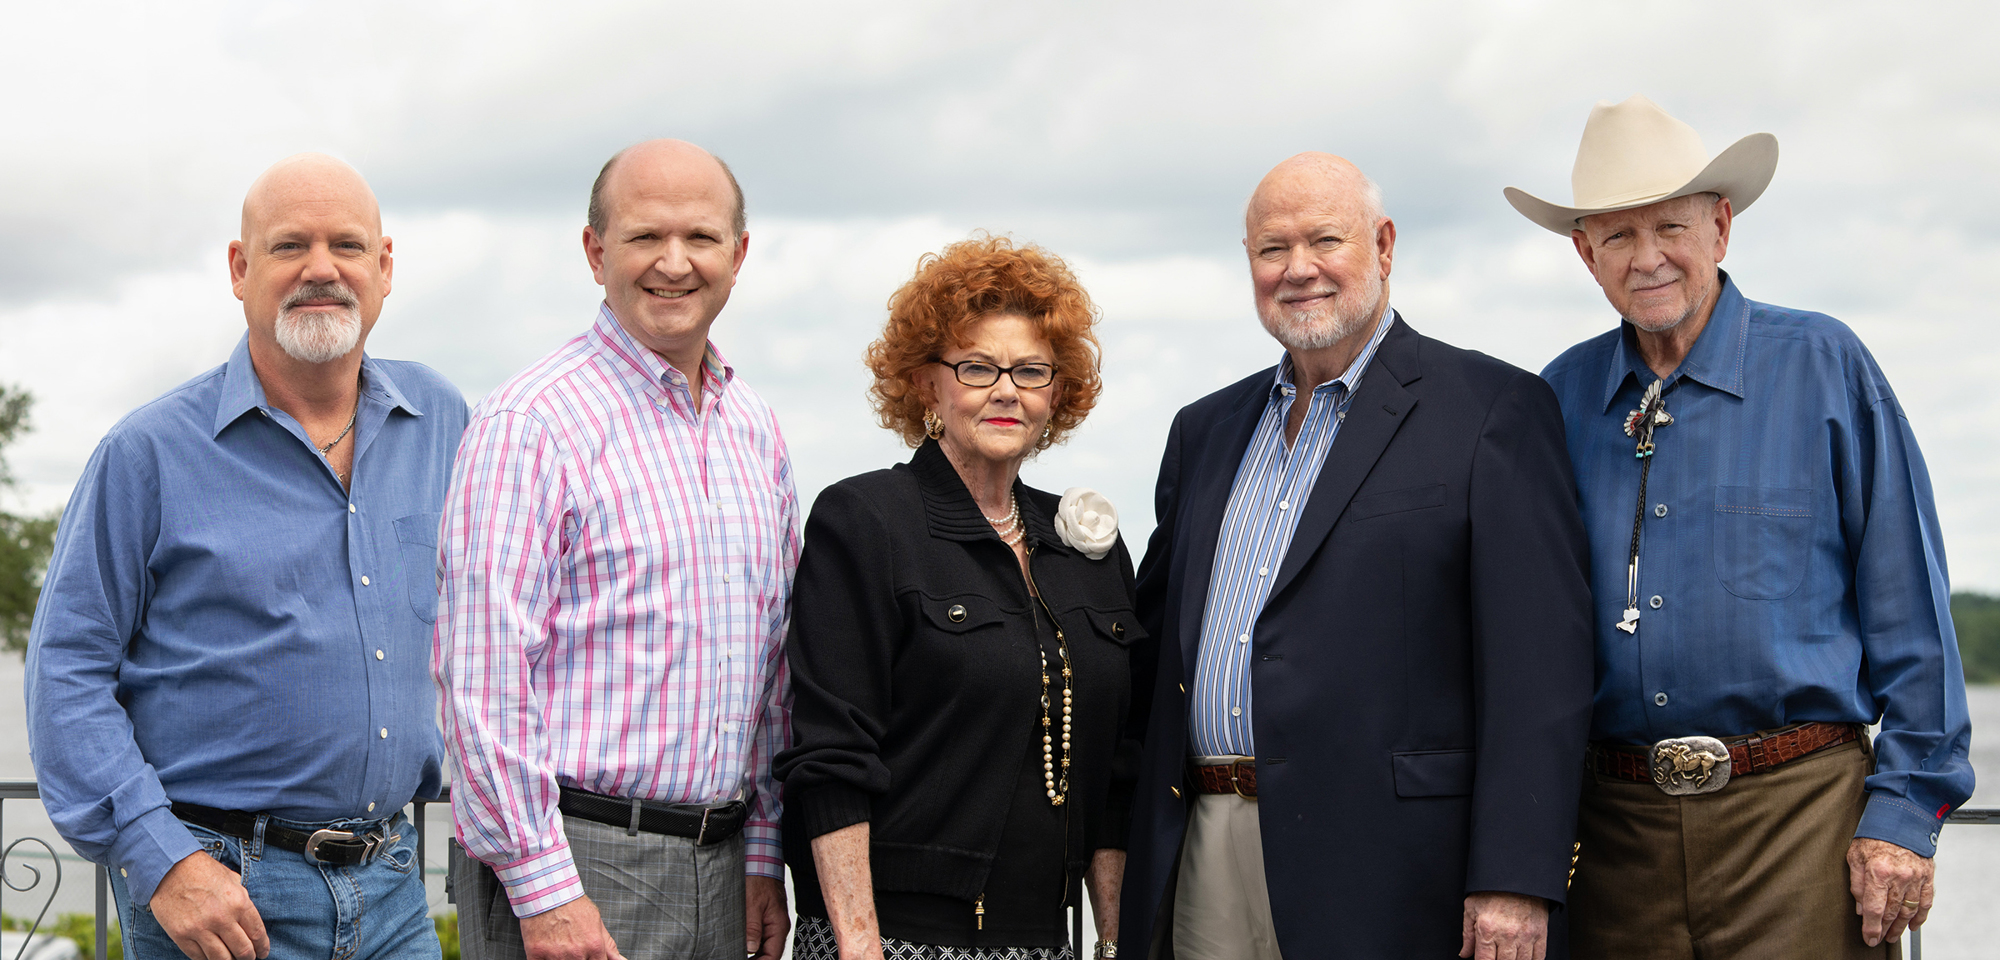 The Shaw family: From left, Howard “Bubba” Shaw Jr., John Shaw III, Sylvia Shaw Pitman, Howard Shaw and John Shaw. All are involved in running Shaw Family Seafood Co., now in its fourth generation of family leadership.